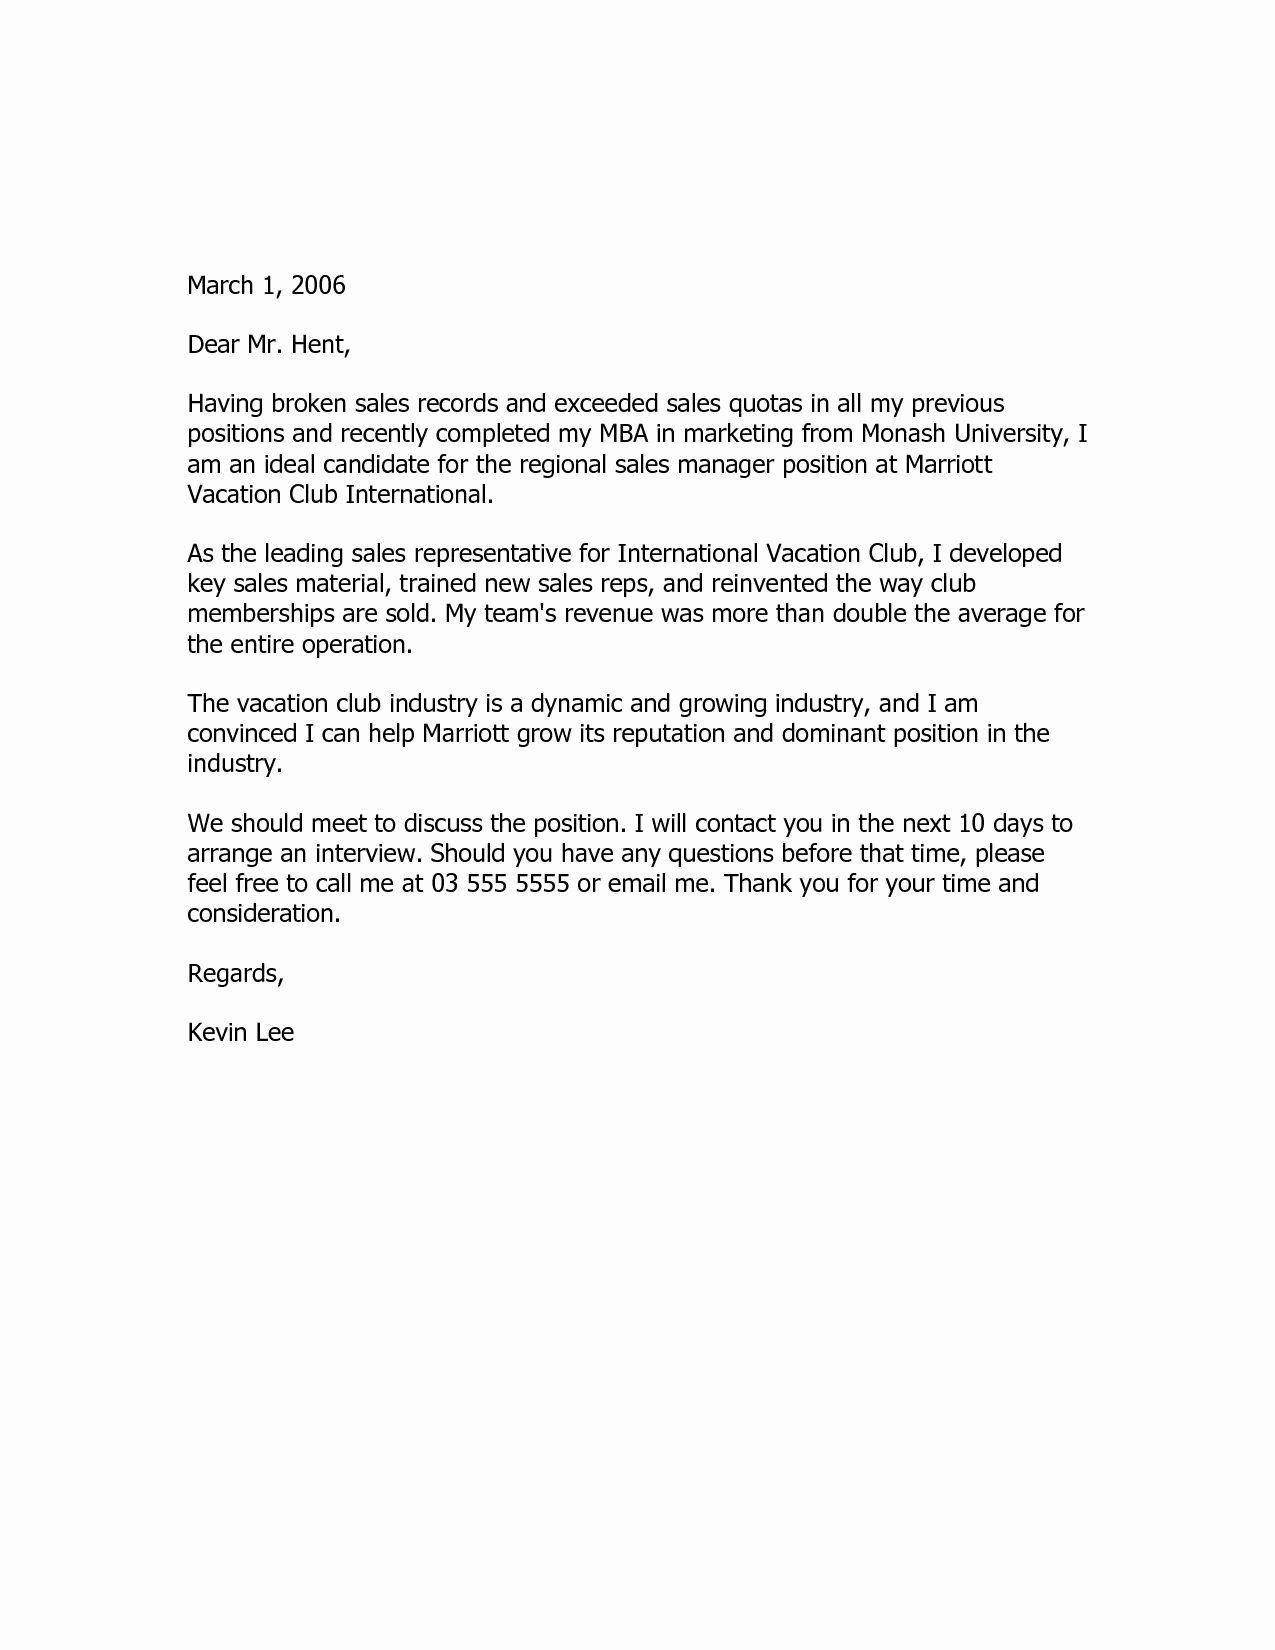 Email Cover Letter Templates New New Cover Letter Template Monash University